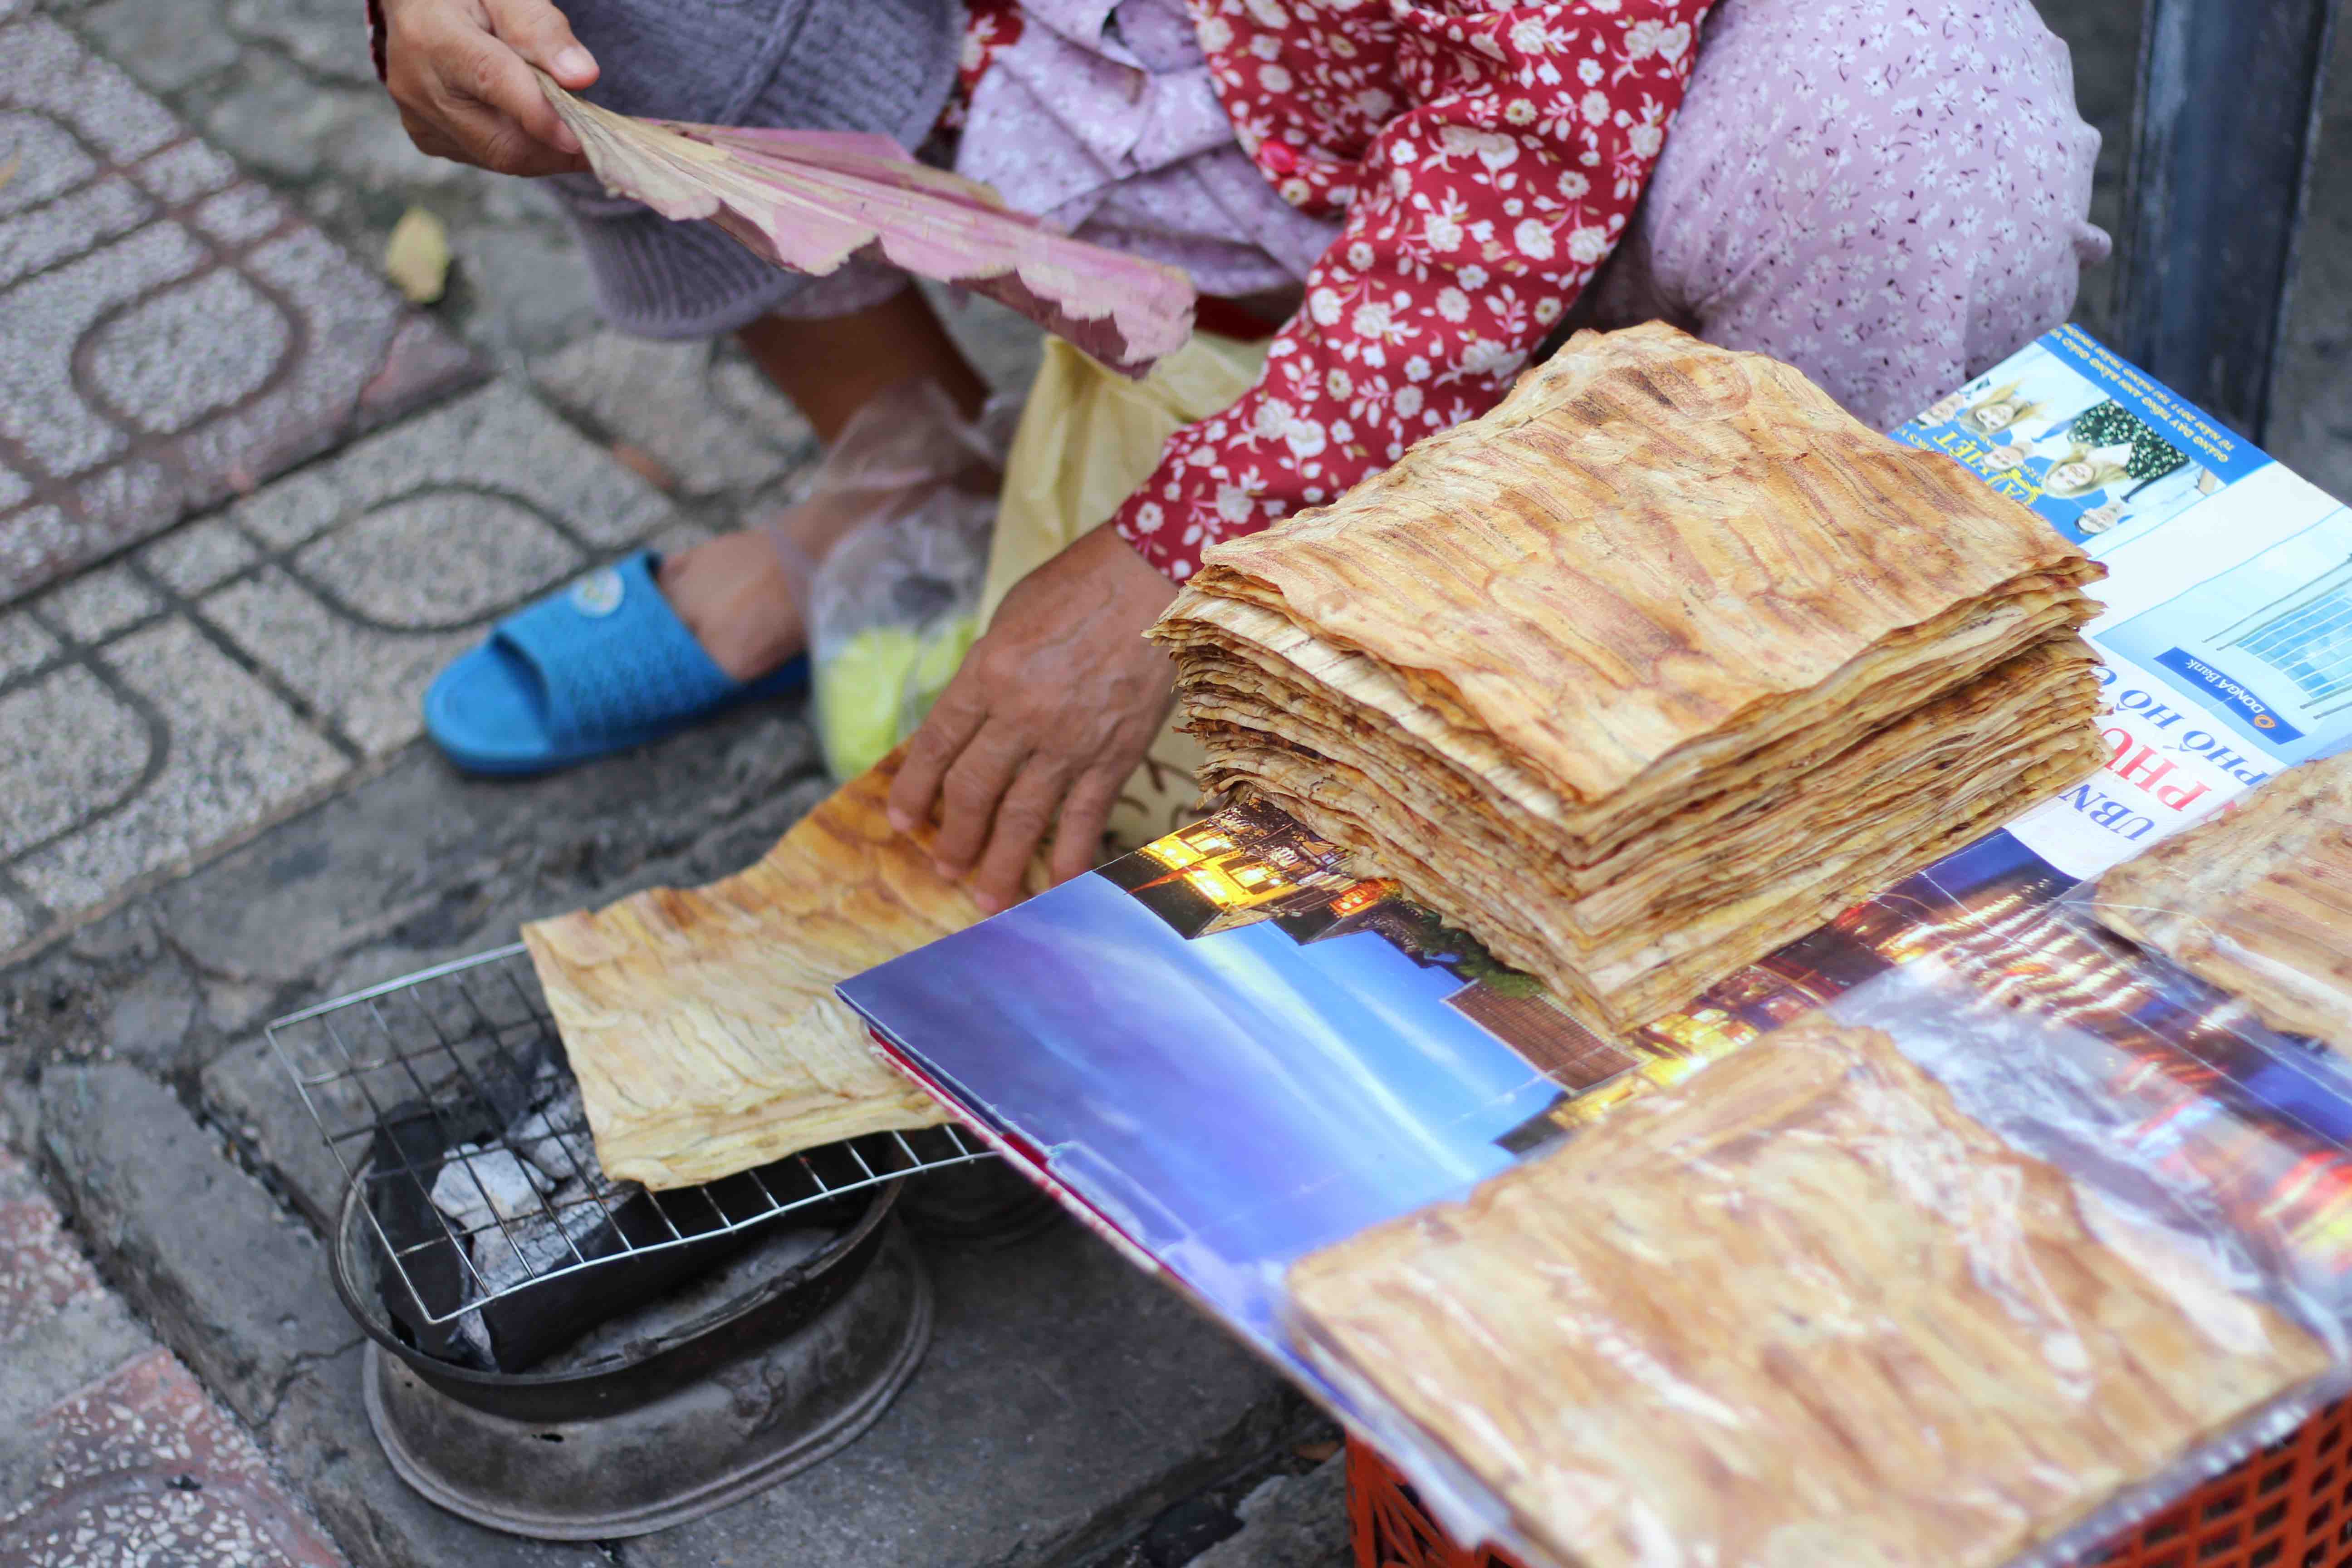 Nguyen Thi Loi grills banh chuoi nuong snack at her stall near Coopmart Nguyen Dinh Chieu supermarket in District 3, Ho Chi Minh City. Photo: Linh To / Tuoi Tre